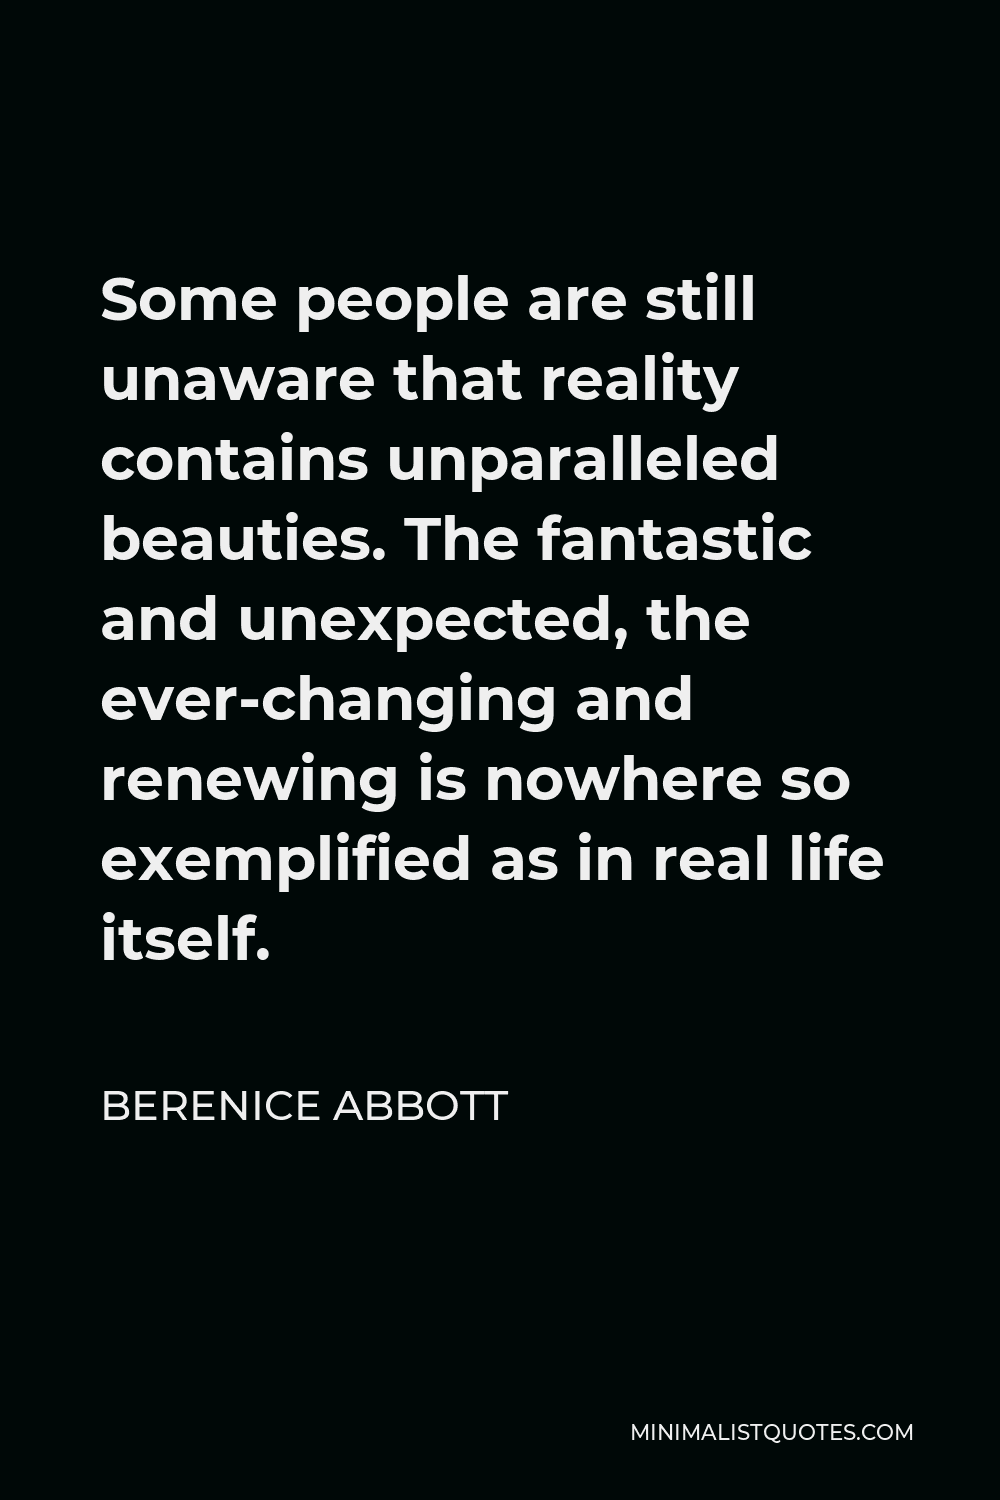 Berenice Abbott Quote - Some people are still unaware that reality contains unparalleled beauties. The fantastic and unexpected, the ever-changing and renewing is nowhere so exemplified as in real life itself.